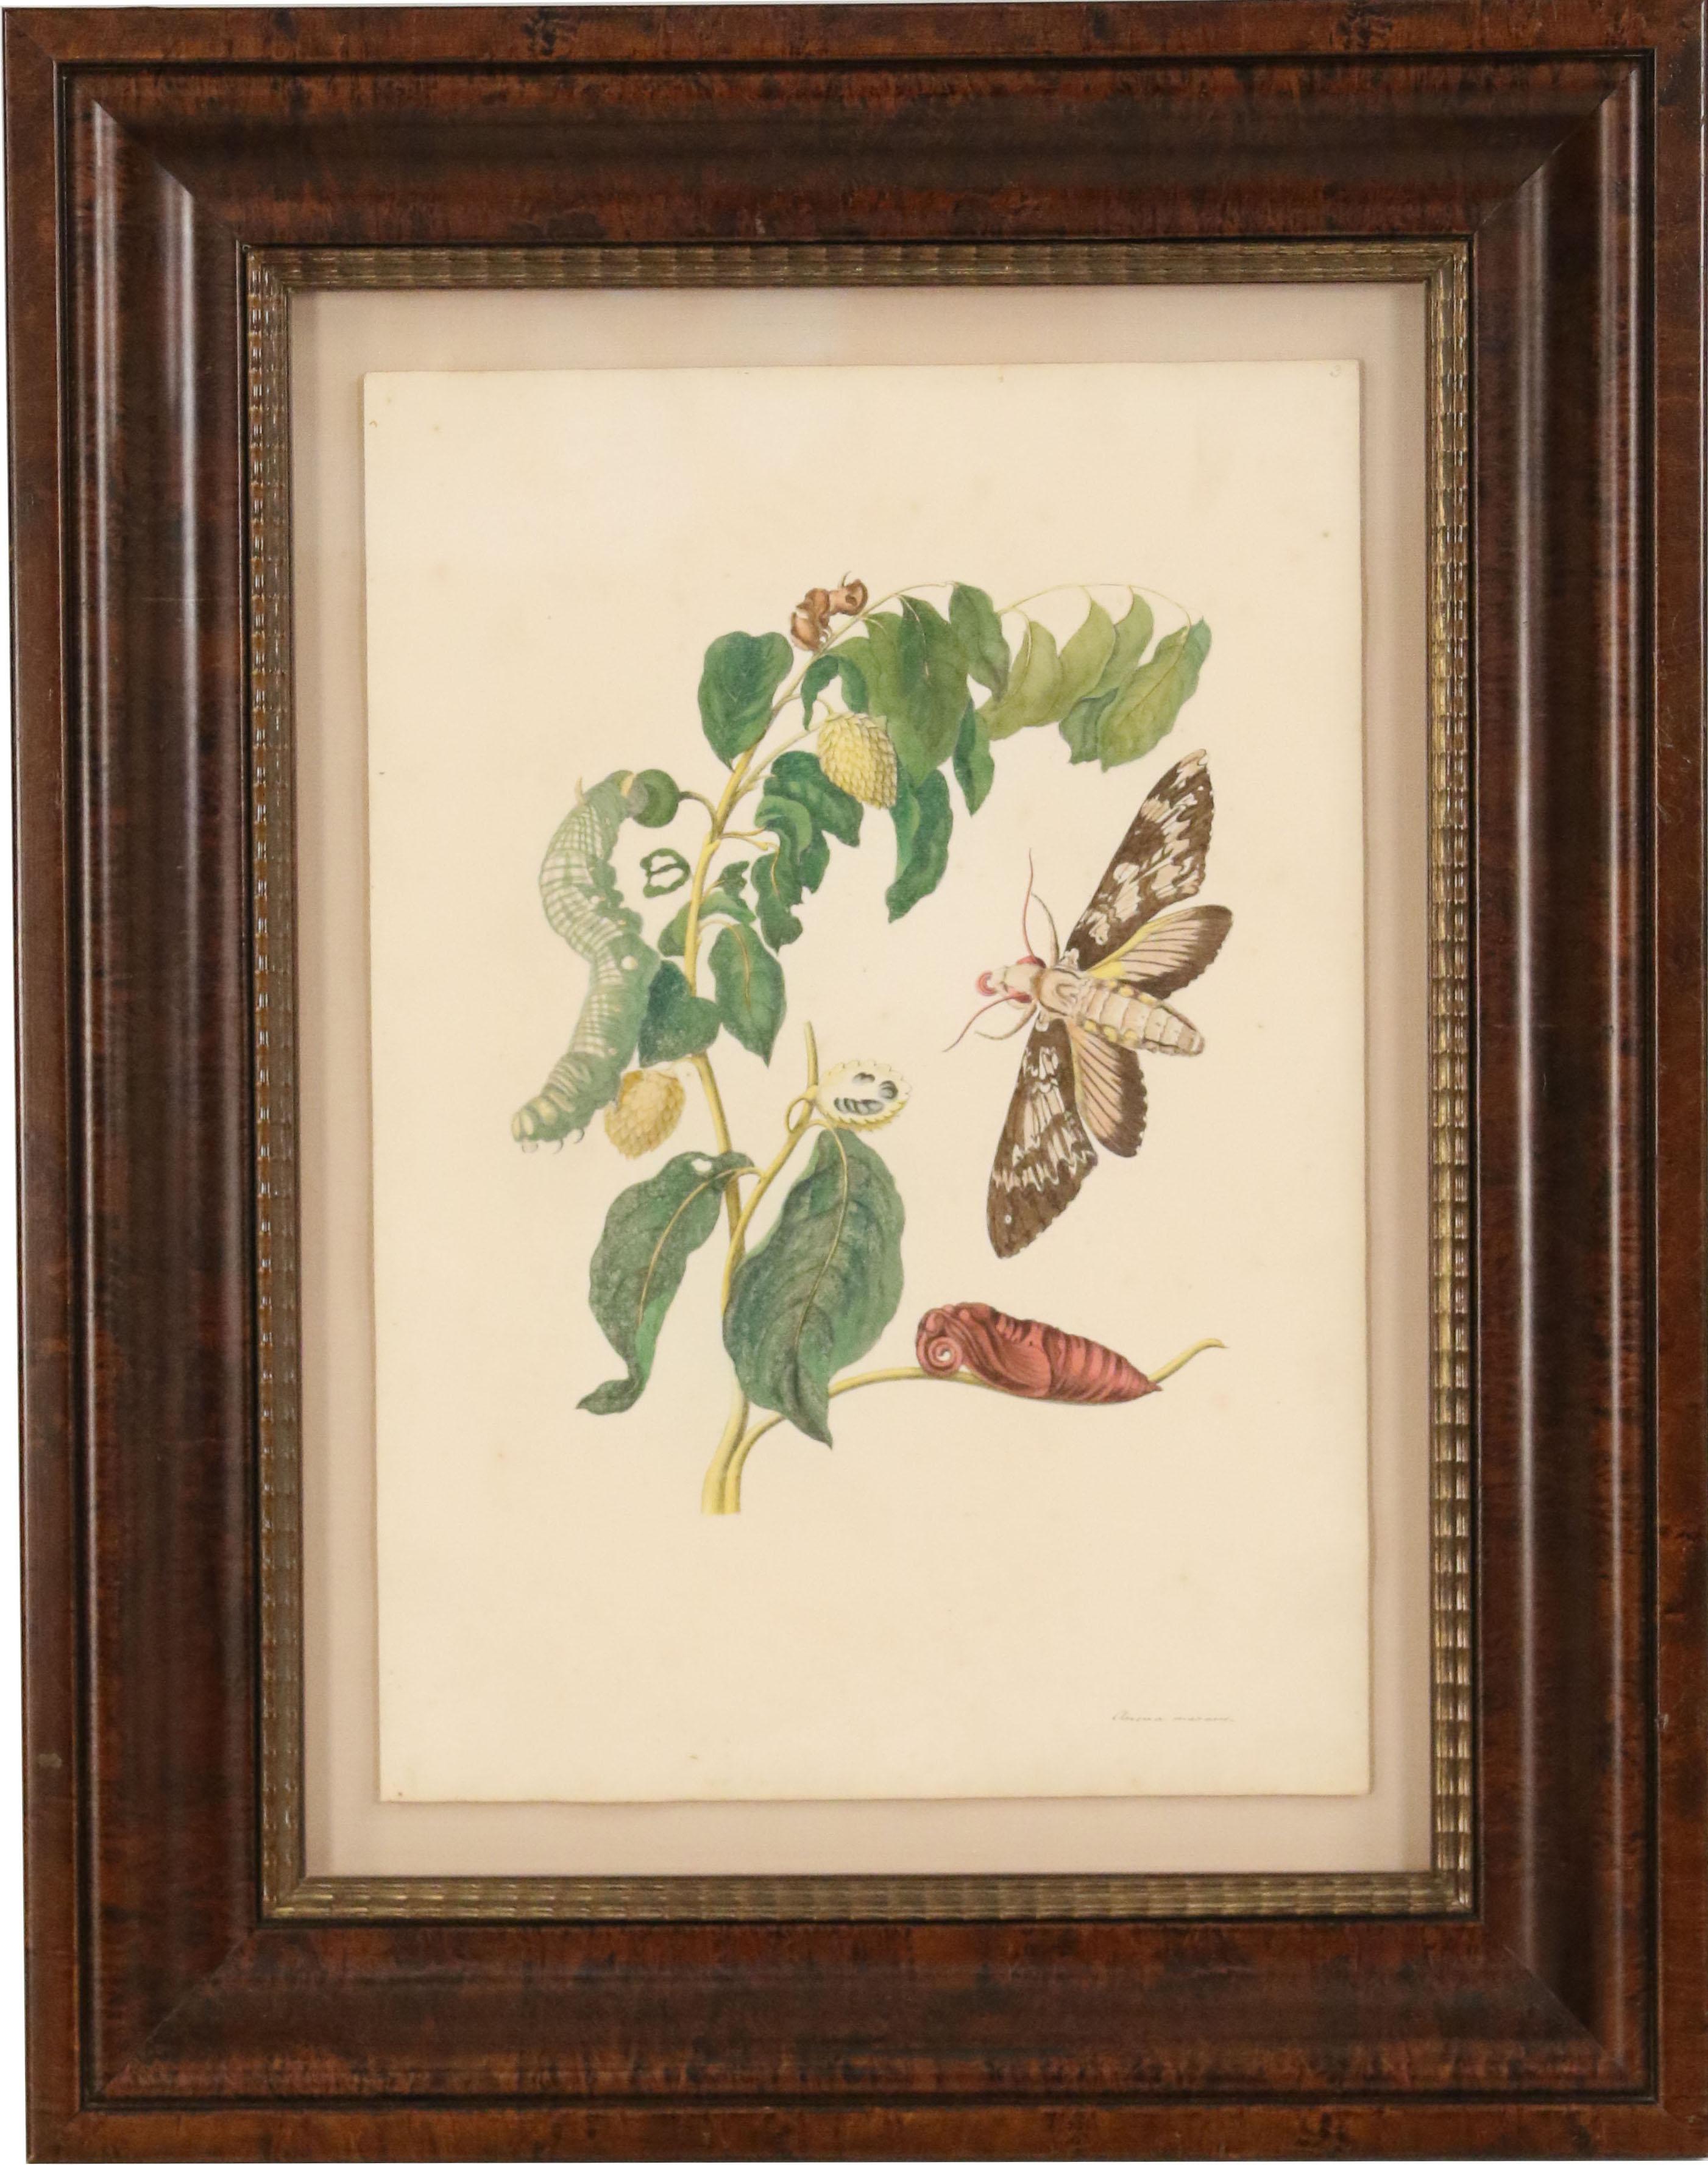 Set of 4 German Baroque naturalist watercolor plate prints of insects and plants from 